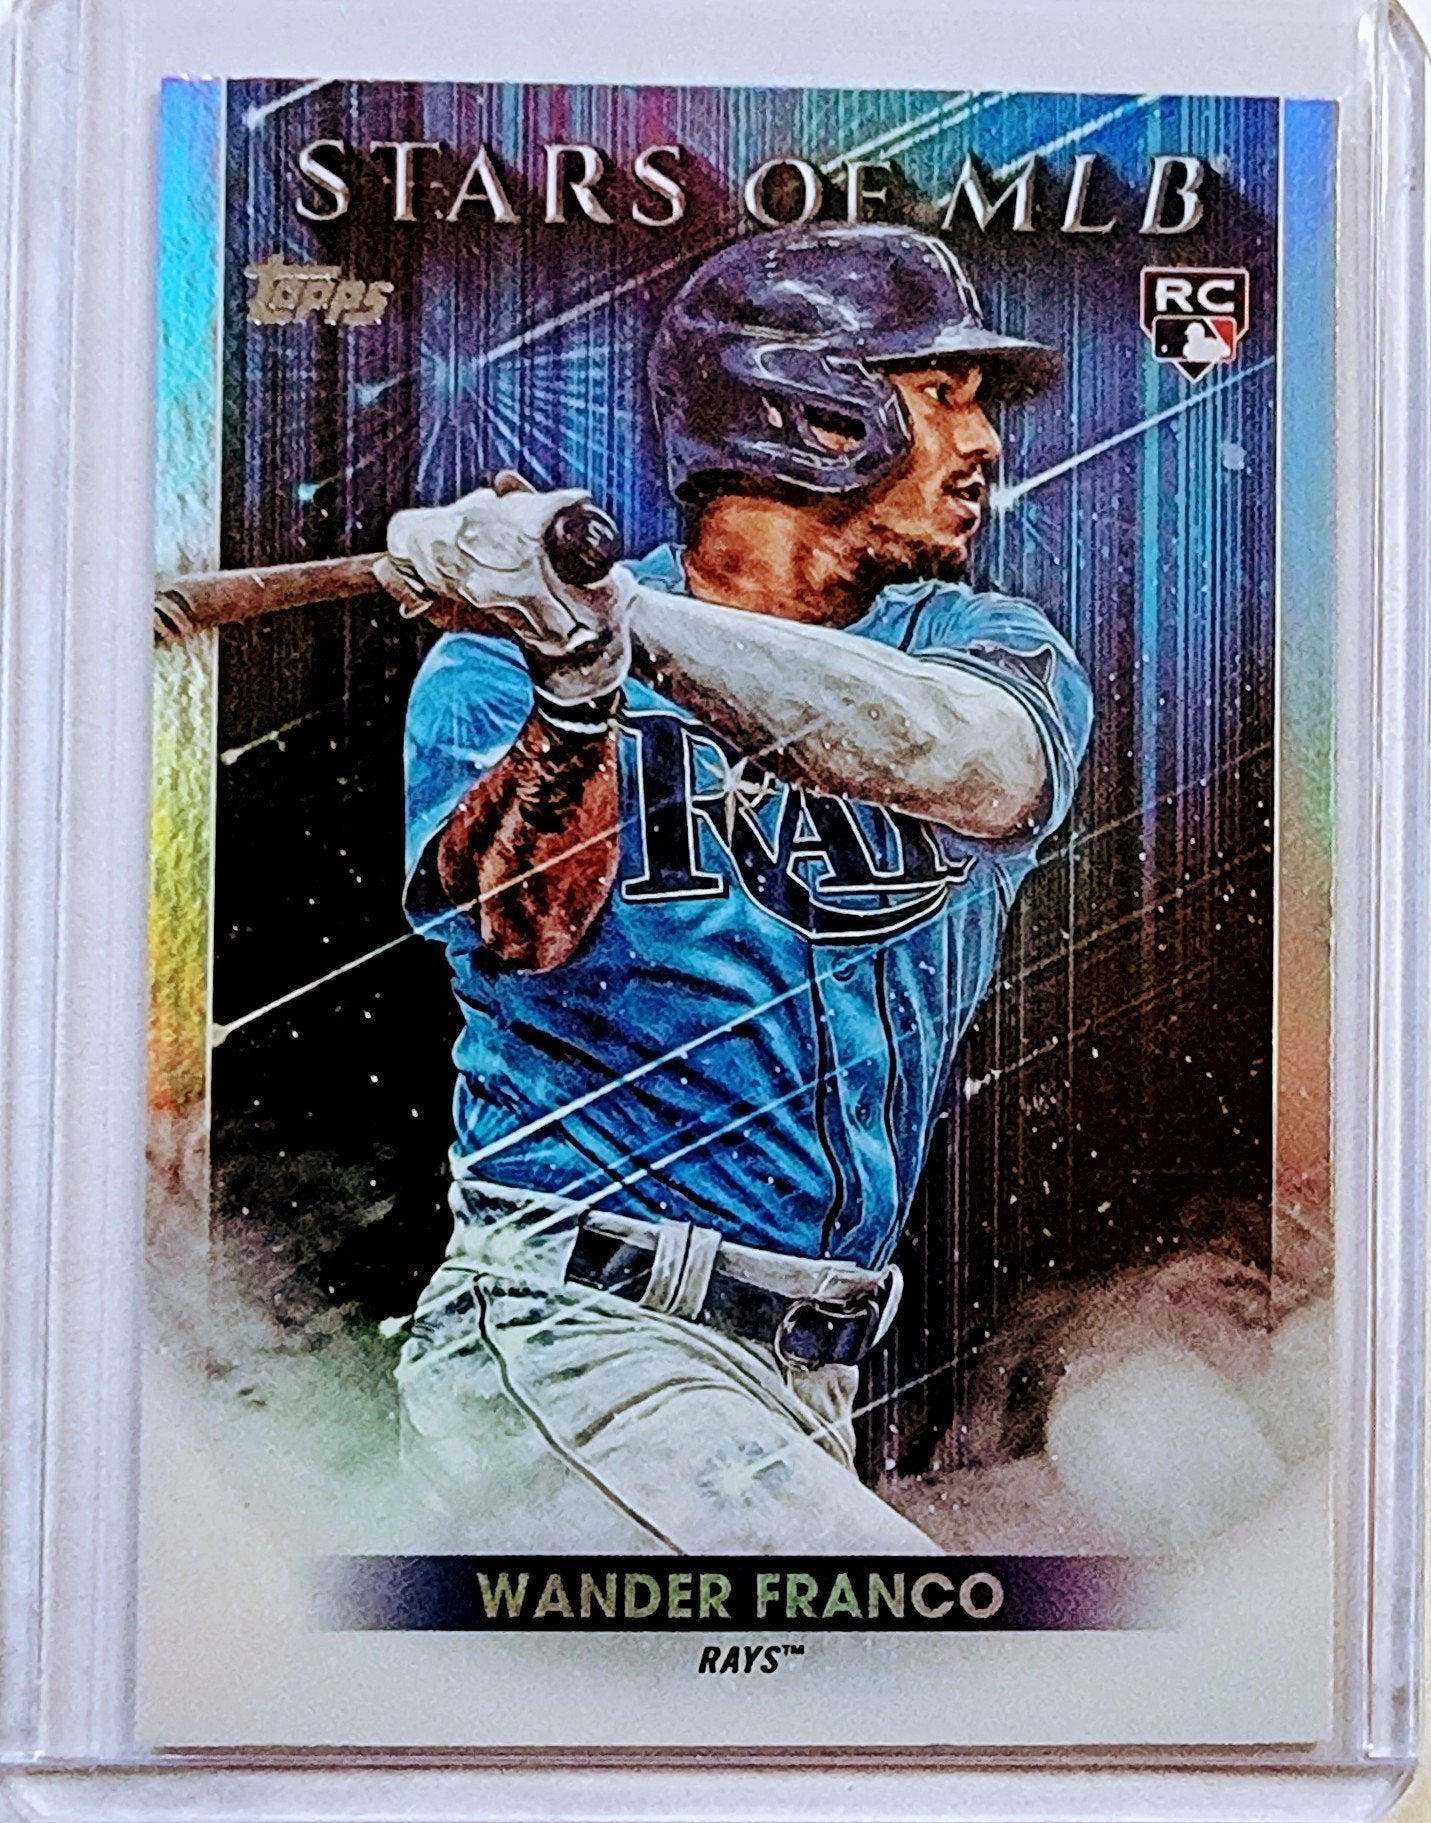 2022 Topps Wander Franco Stars Of The MLB Insert Foil Rookie Baseball Card simple Xclusive Collectibles   